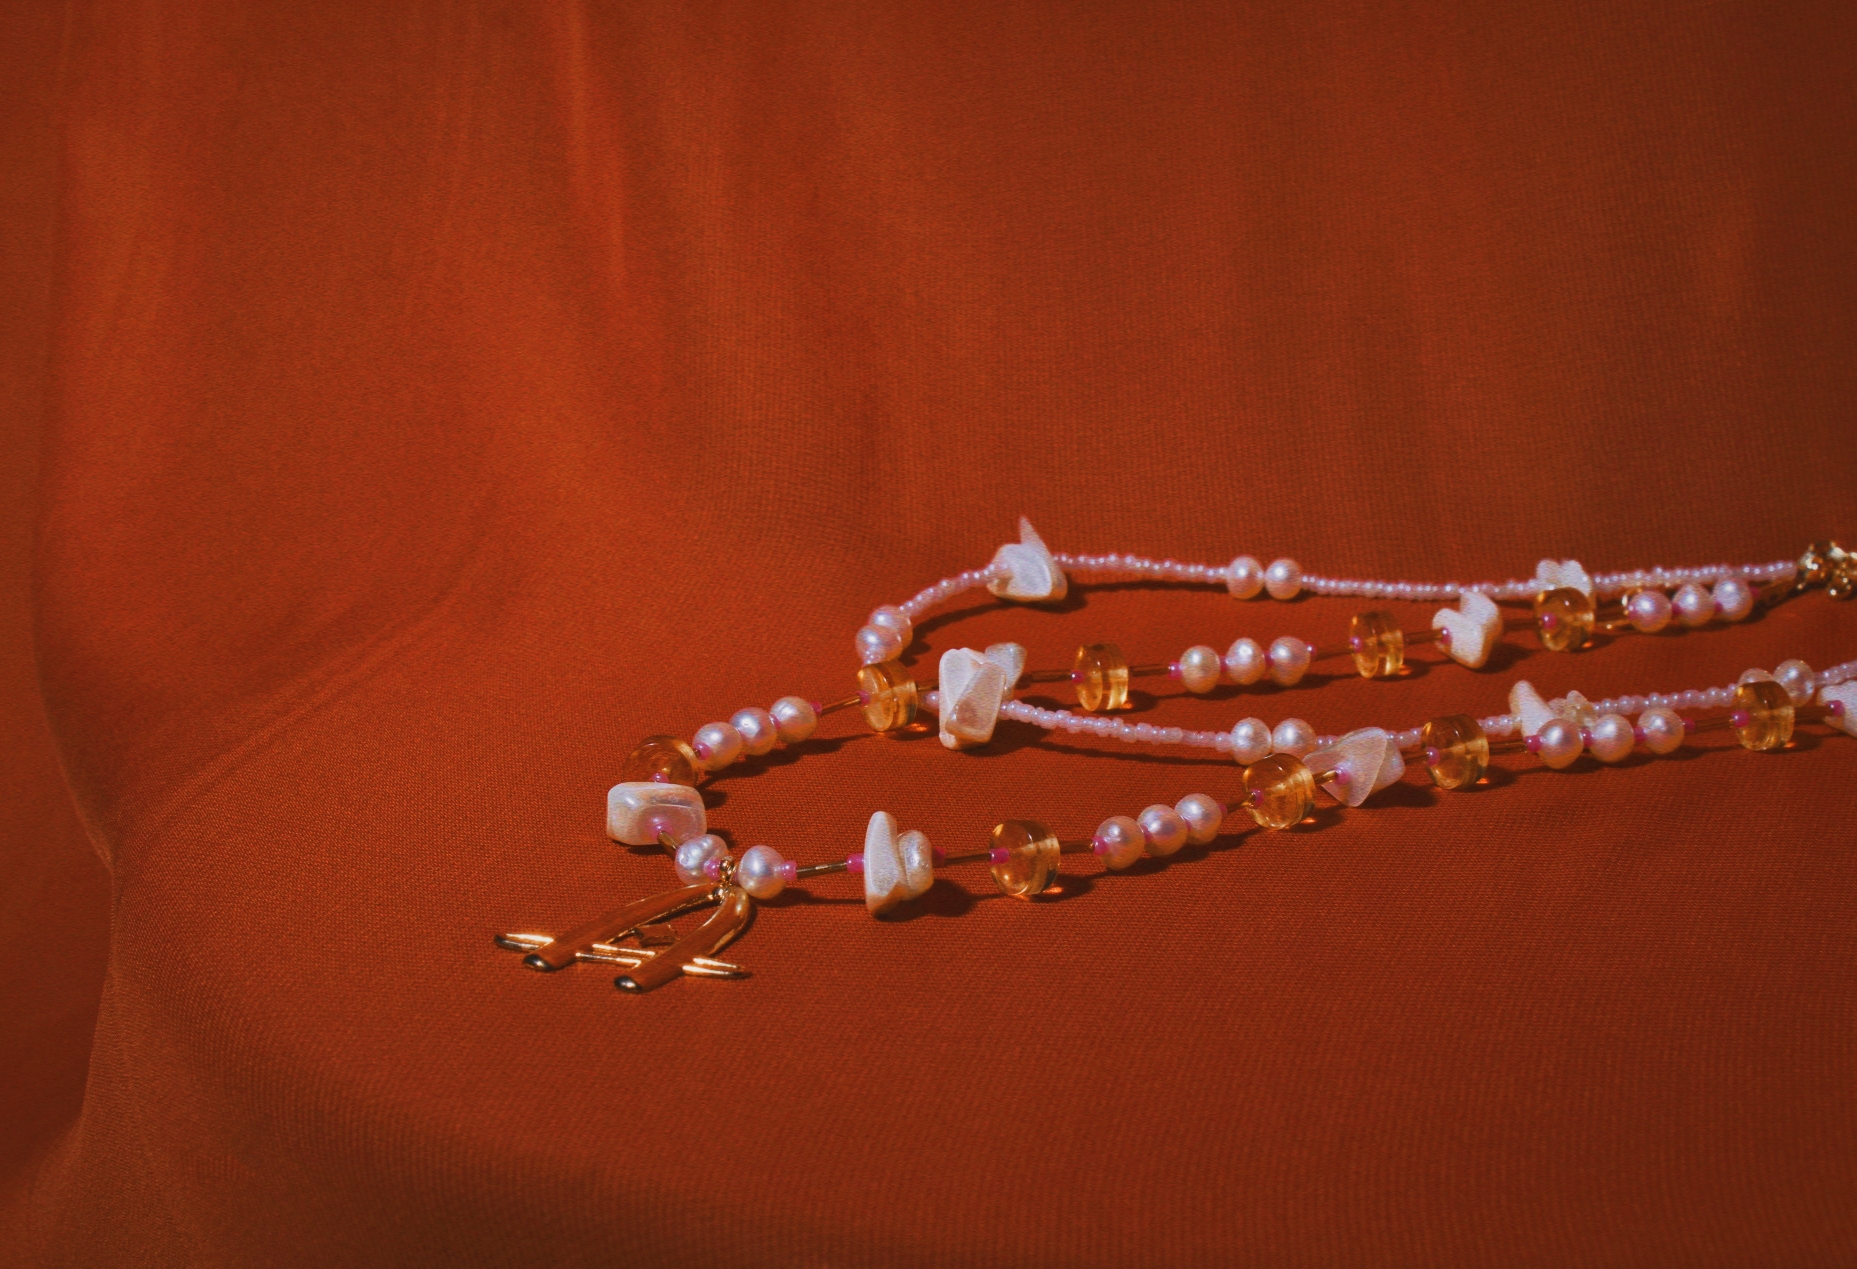 A beaded gemstone necklace set against a red background.